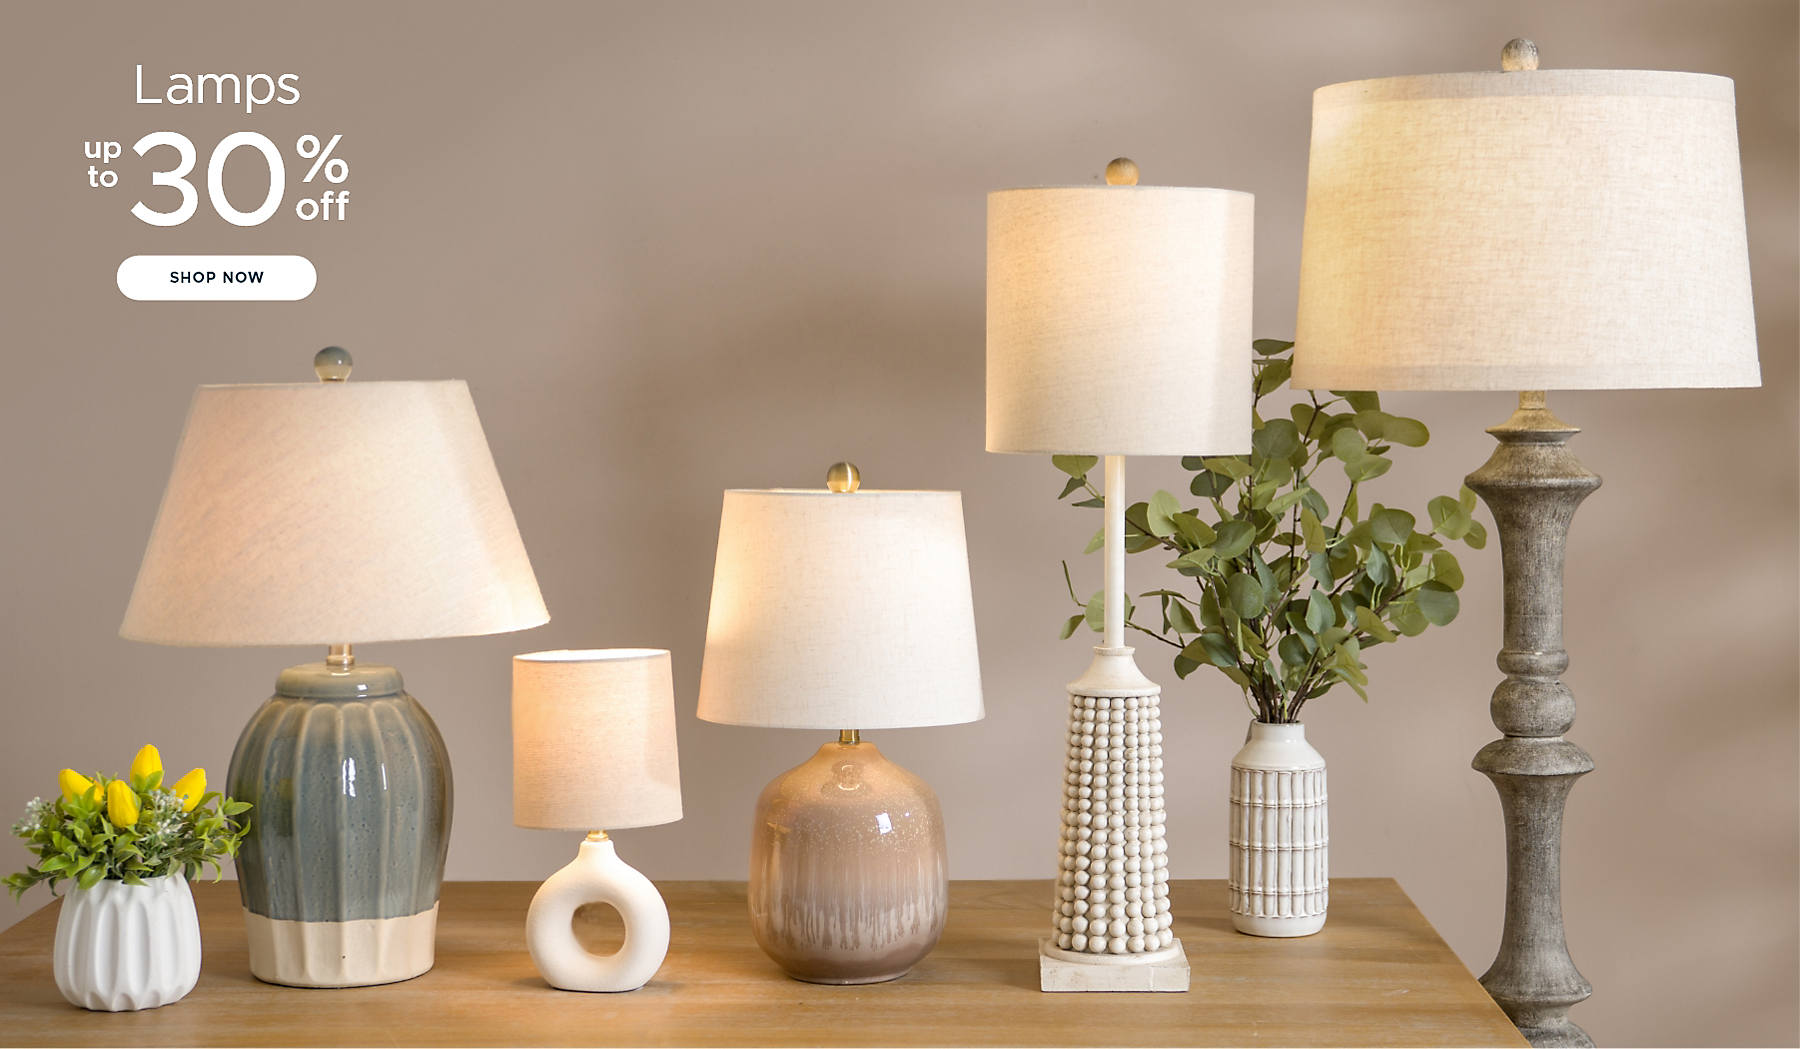 Lamps up to 30% off shop now